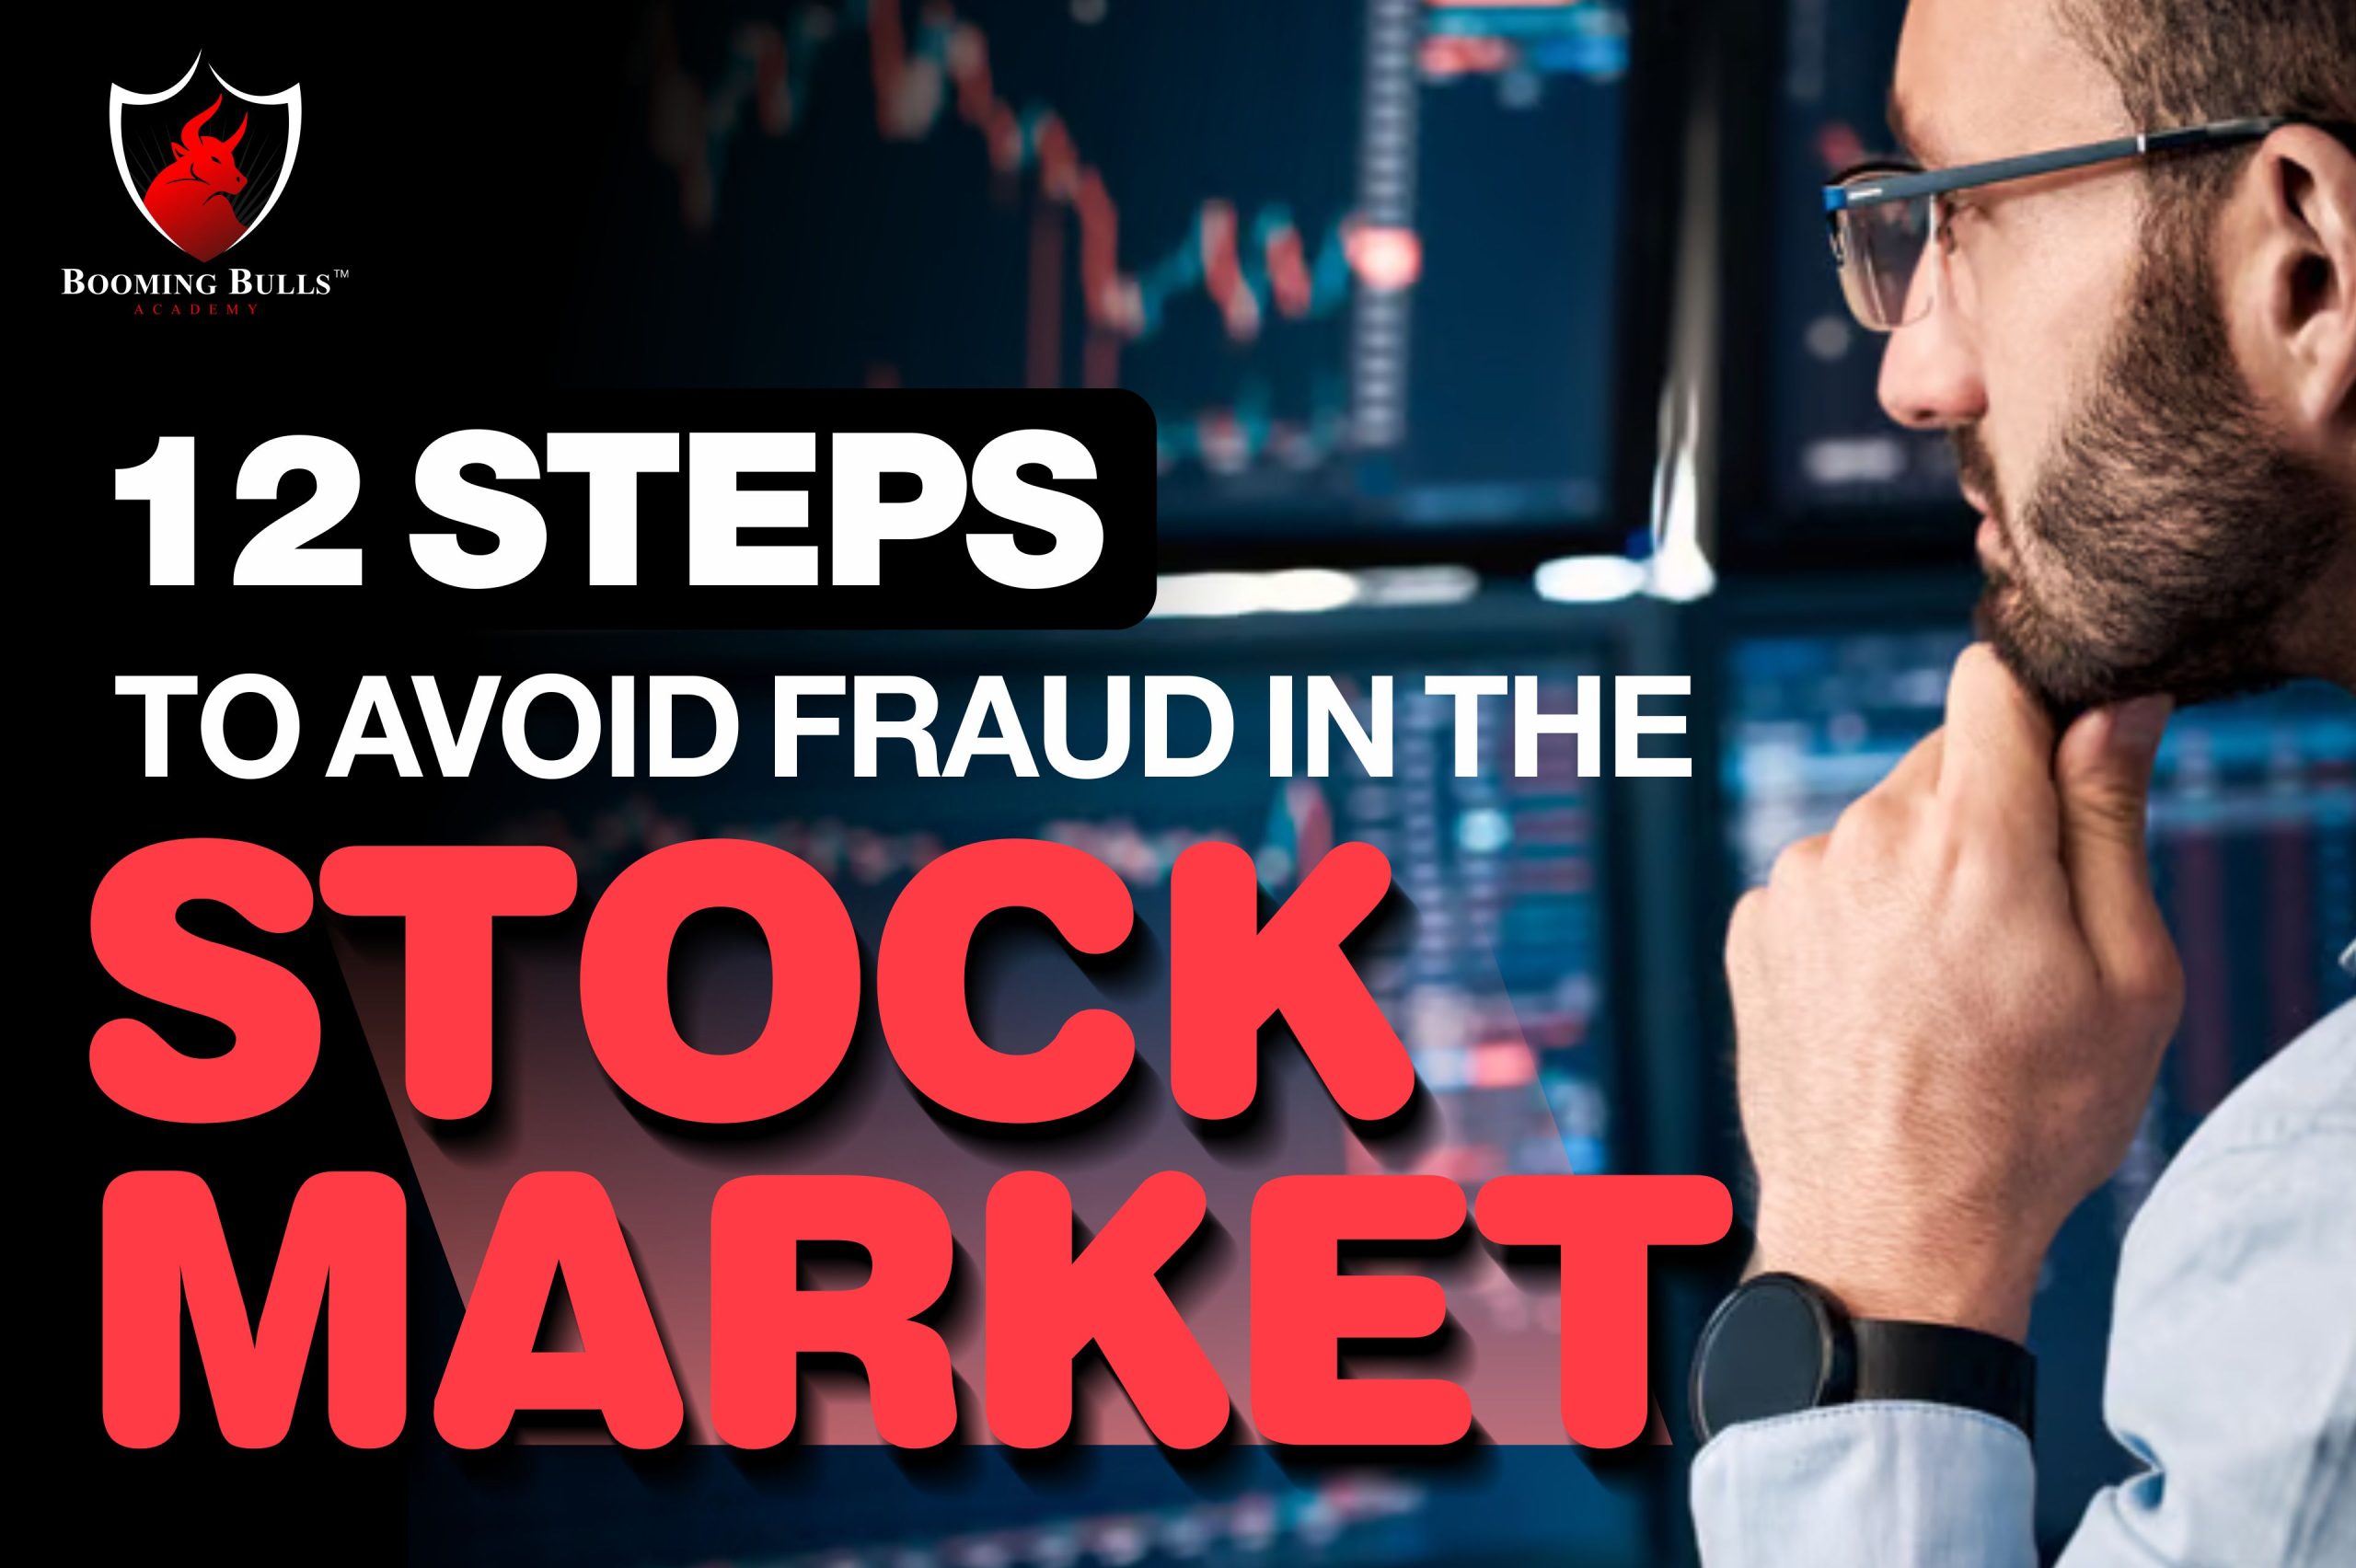 12 Steps to Avoid Fraud in the Stock Market